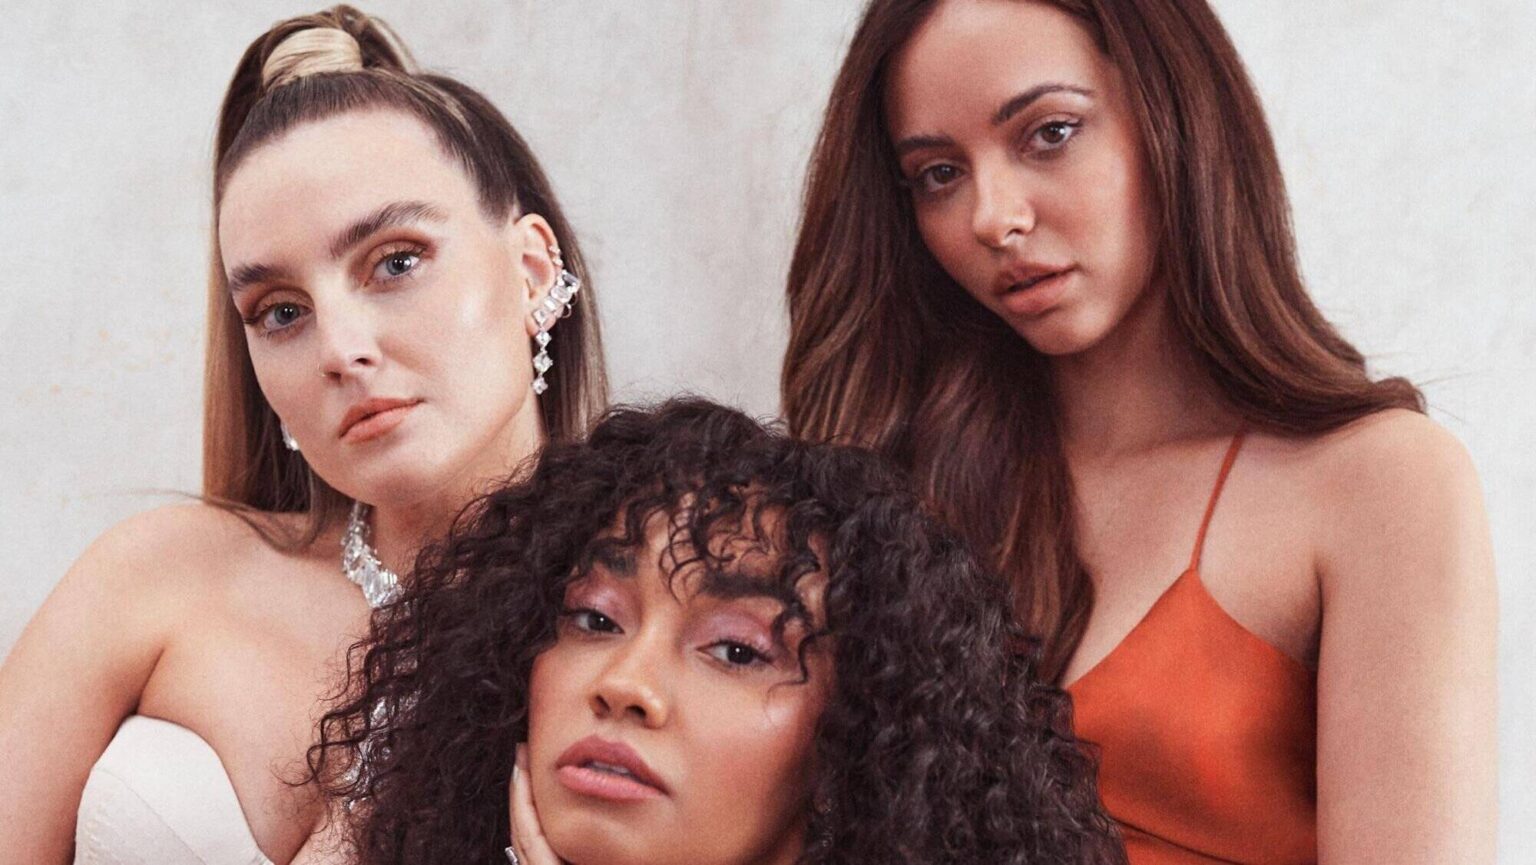 Little Mix got littler last year after Jesy Nelson left. However, the group has announced their return! Celebrate with all the best Little Mix songs here.